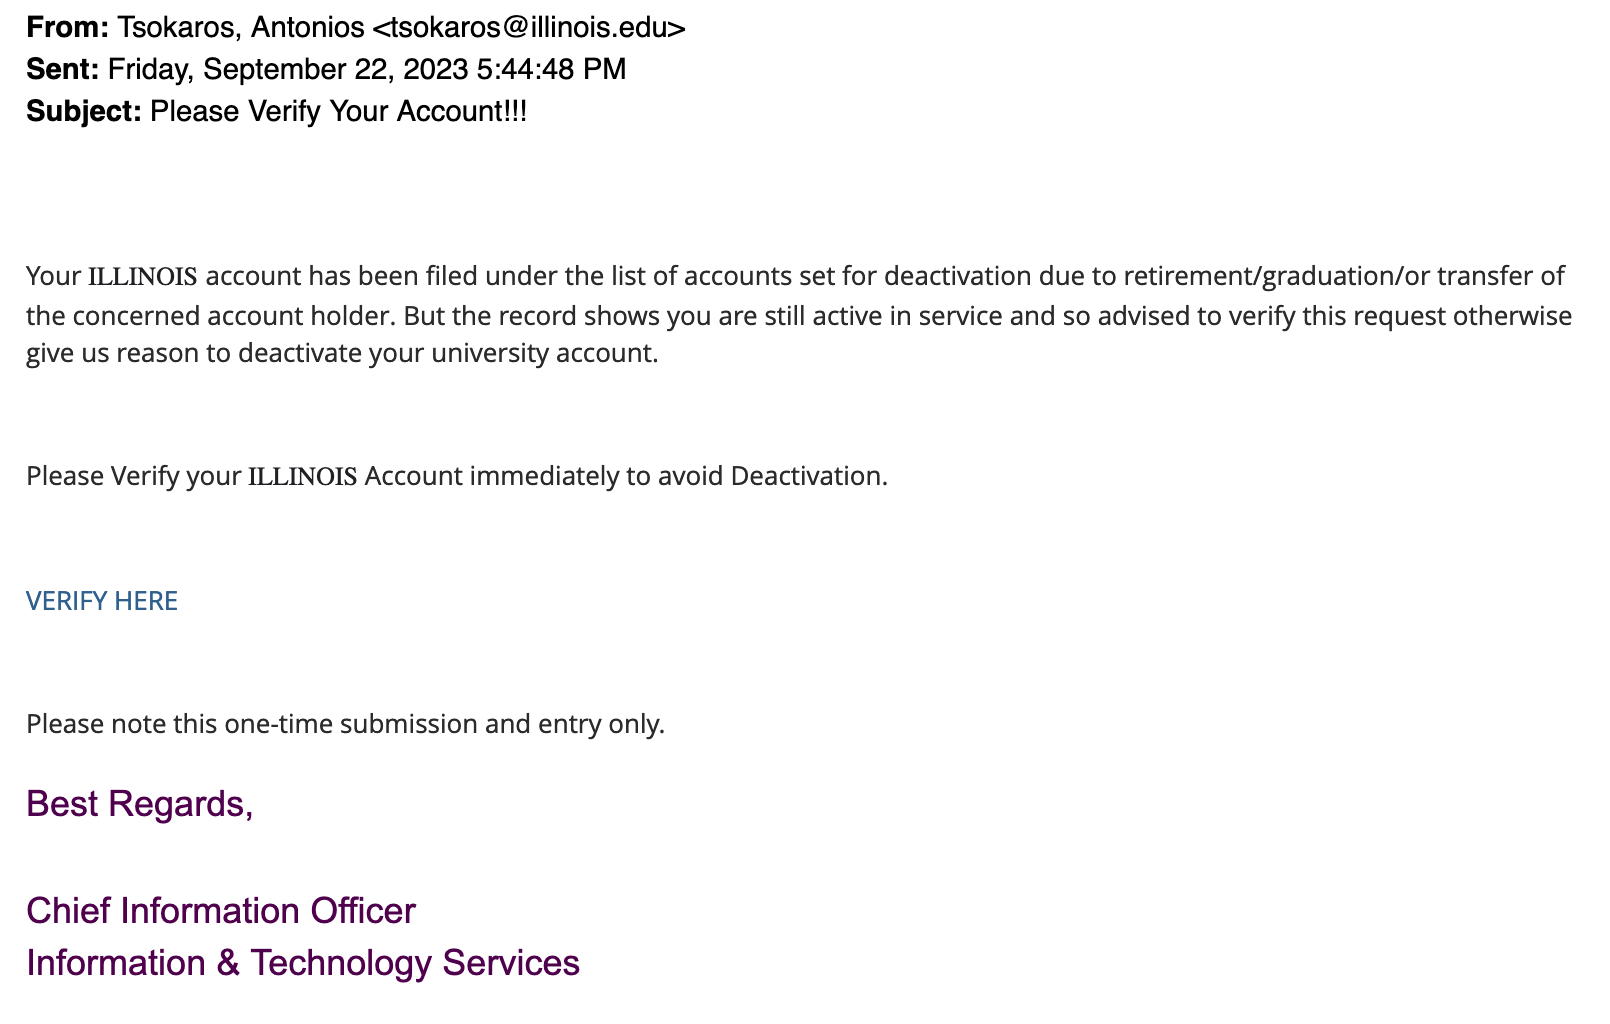 Phish purporting to be from the CIO of Tech Services alerting the recipient that their email account is set to be deactivated unless they verify.